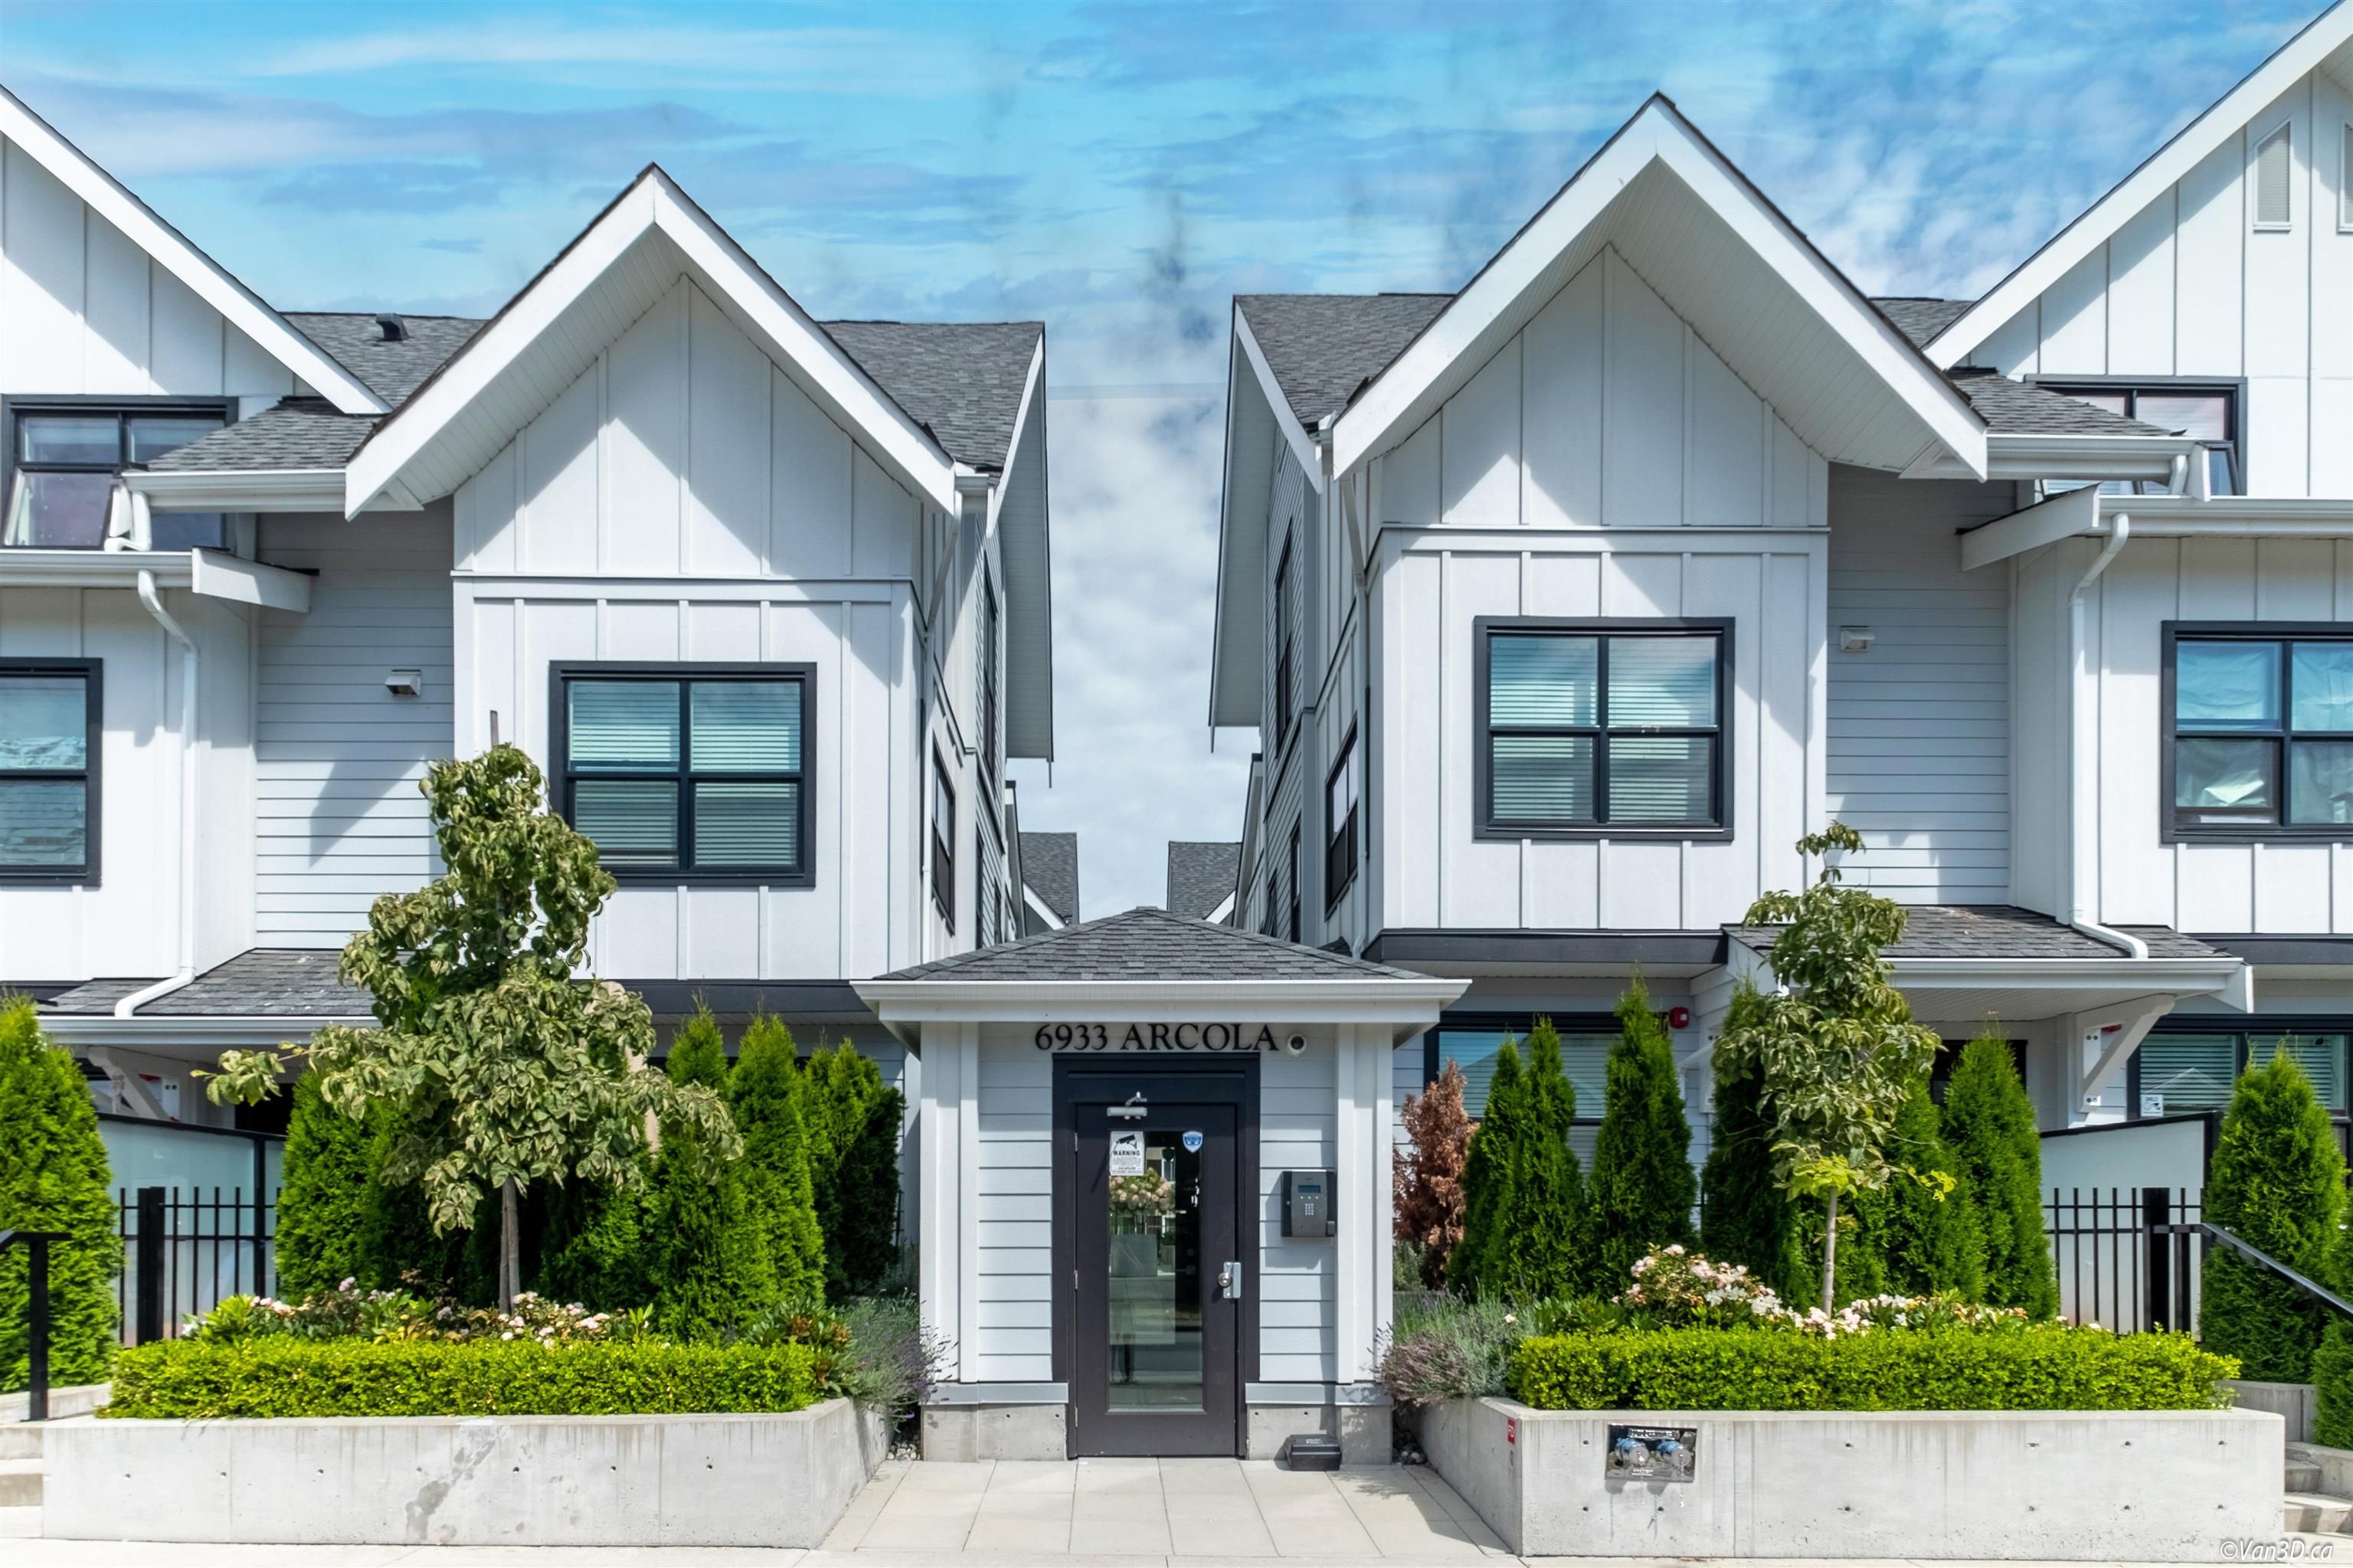 Open House. Open House on Monday, September 4, 2023 2:00PM - 4:00PM
Beautiful 2yr old spacious 1500 sqft Townhouse with 3 bedrooms, 2 1/2baths plus basement office use or ? This will not last ! Popular Highgate Burnaby location close to everything. This o